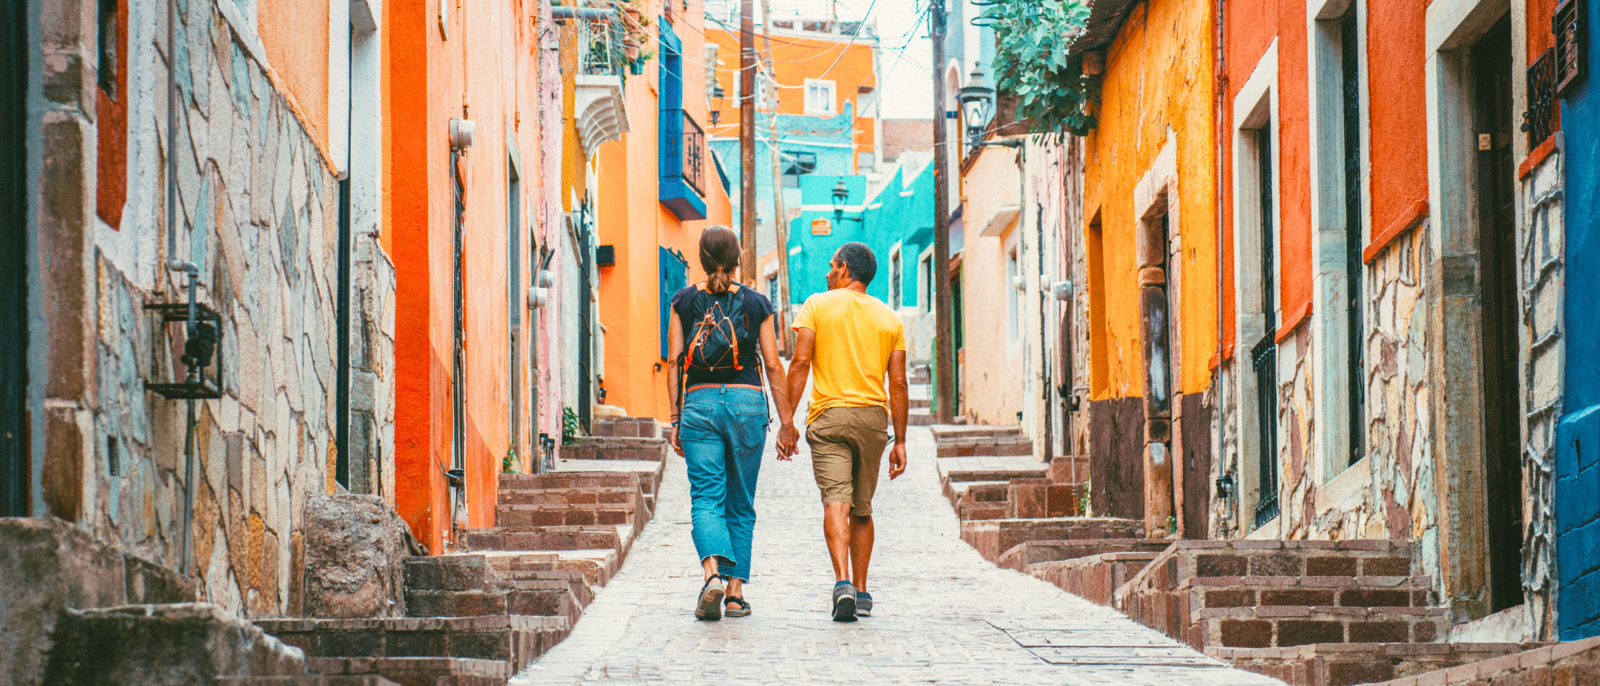 Couple walking the colorful narrow streets of Guanajuato in Mexico